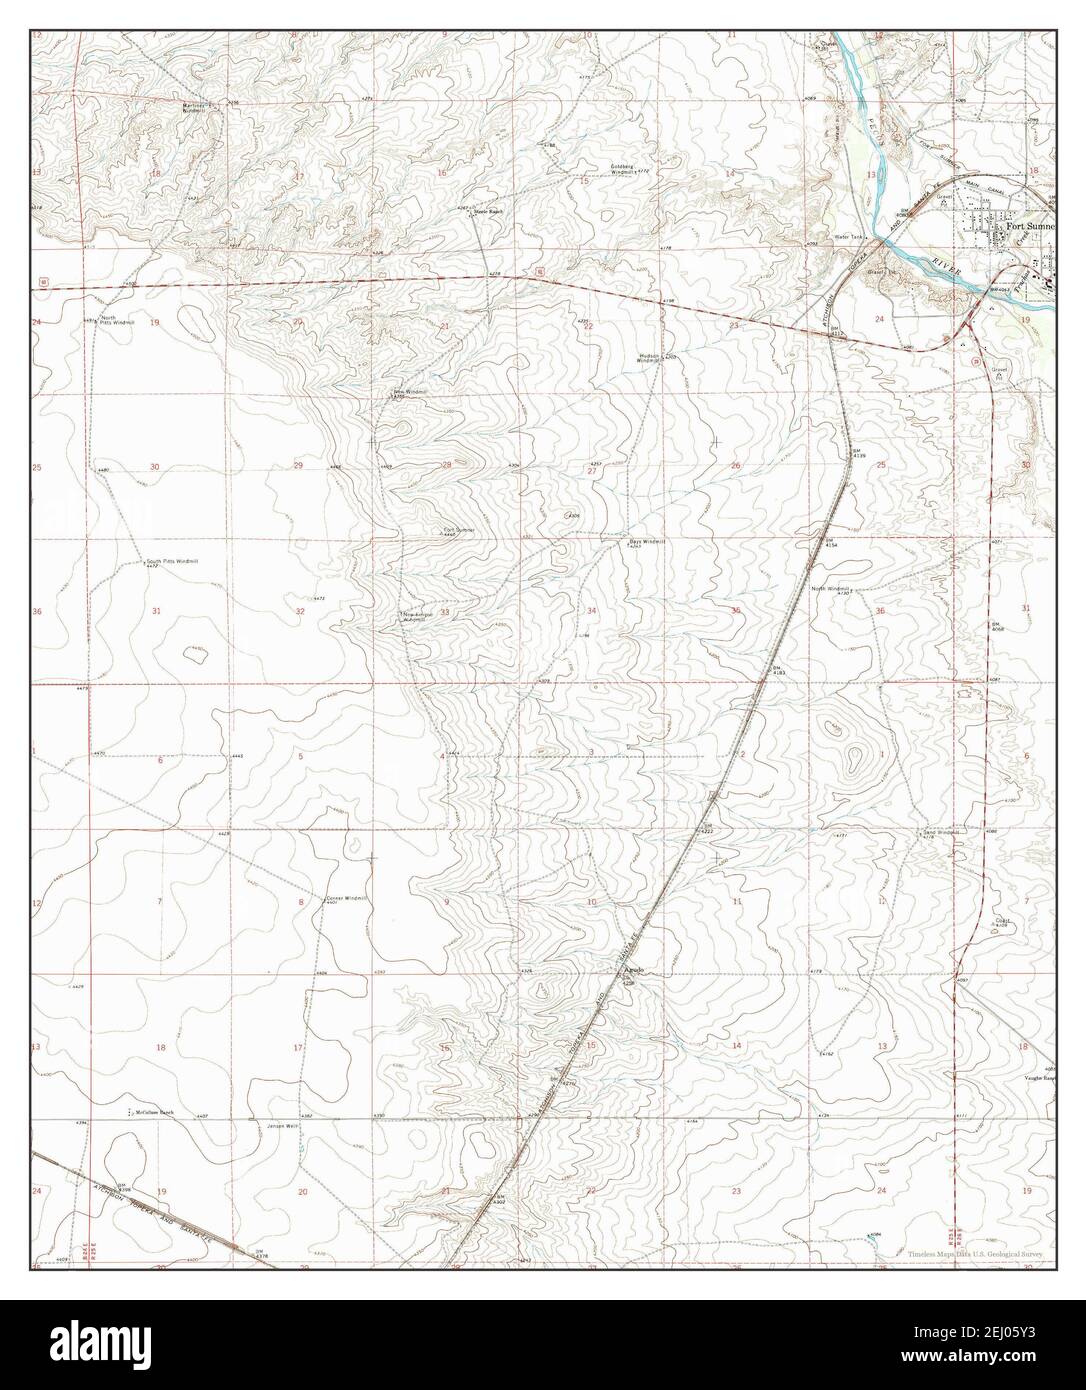 Fort Sumner West New Mexico Map 1965 124000 United States Of America By Timeless Maps Data 8596